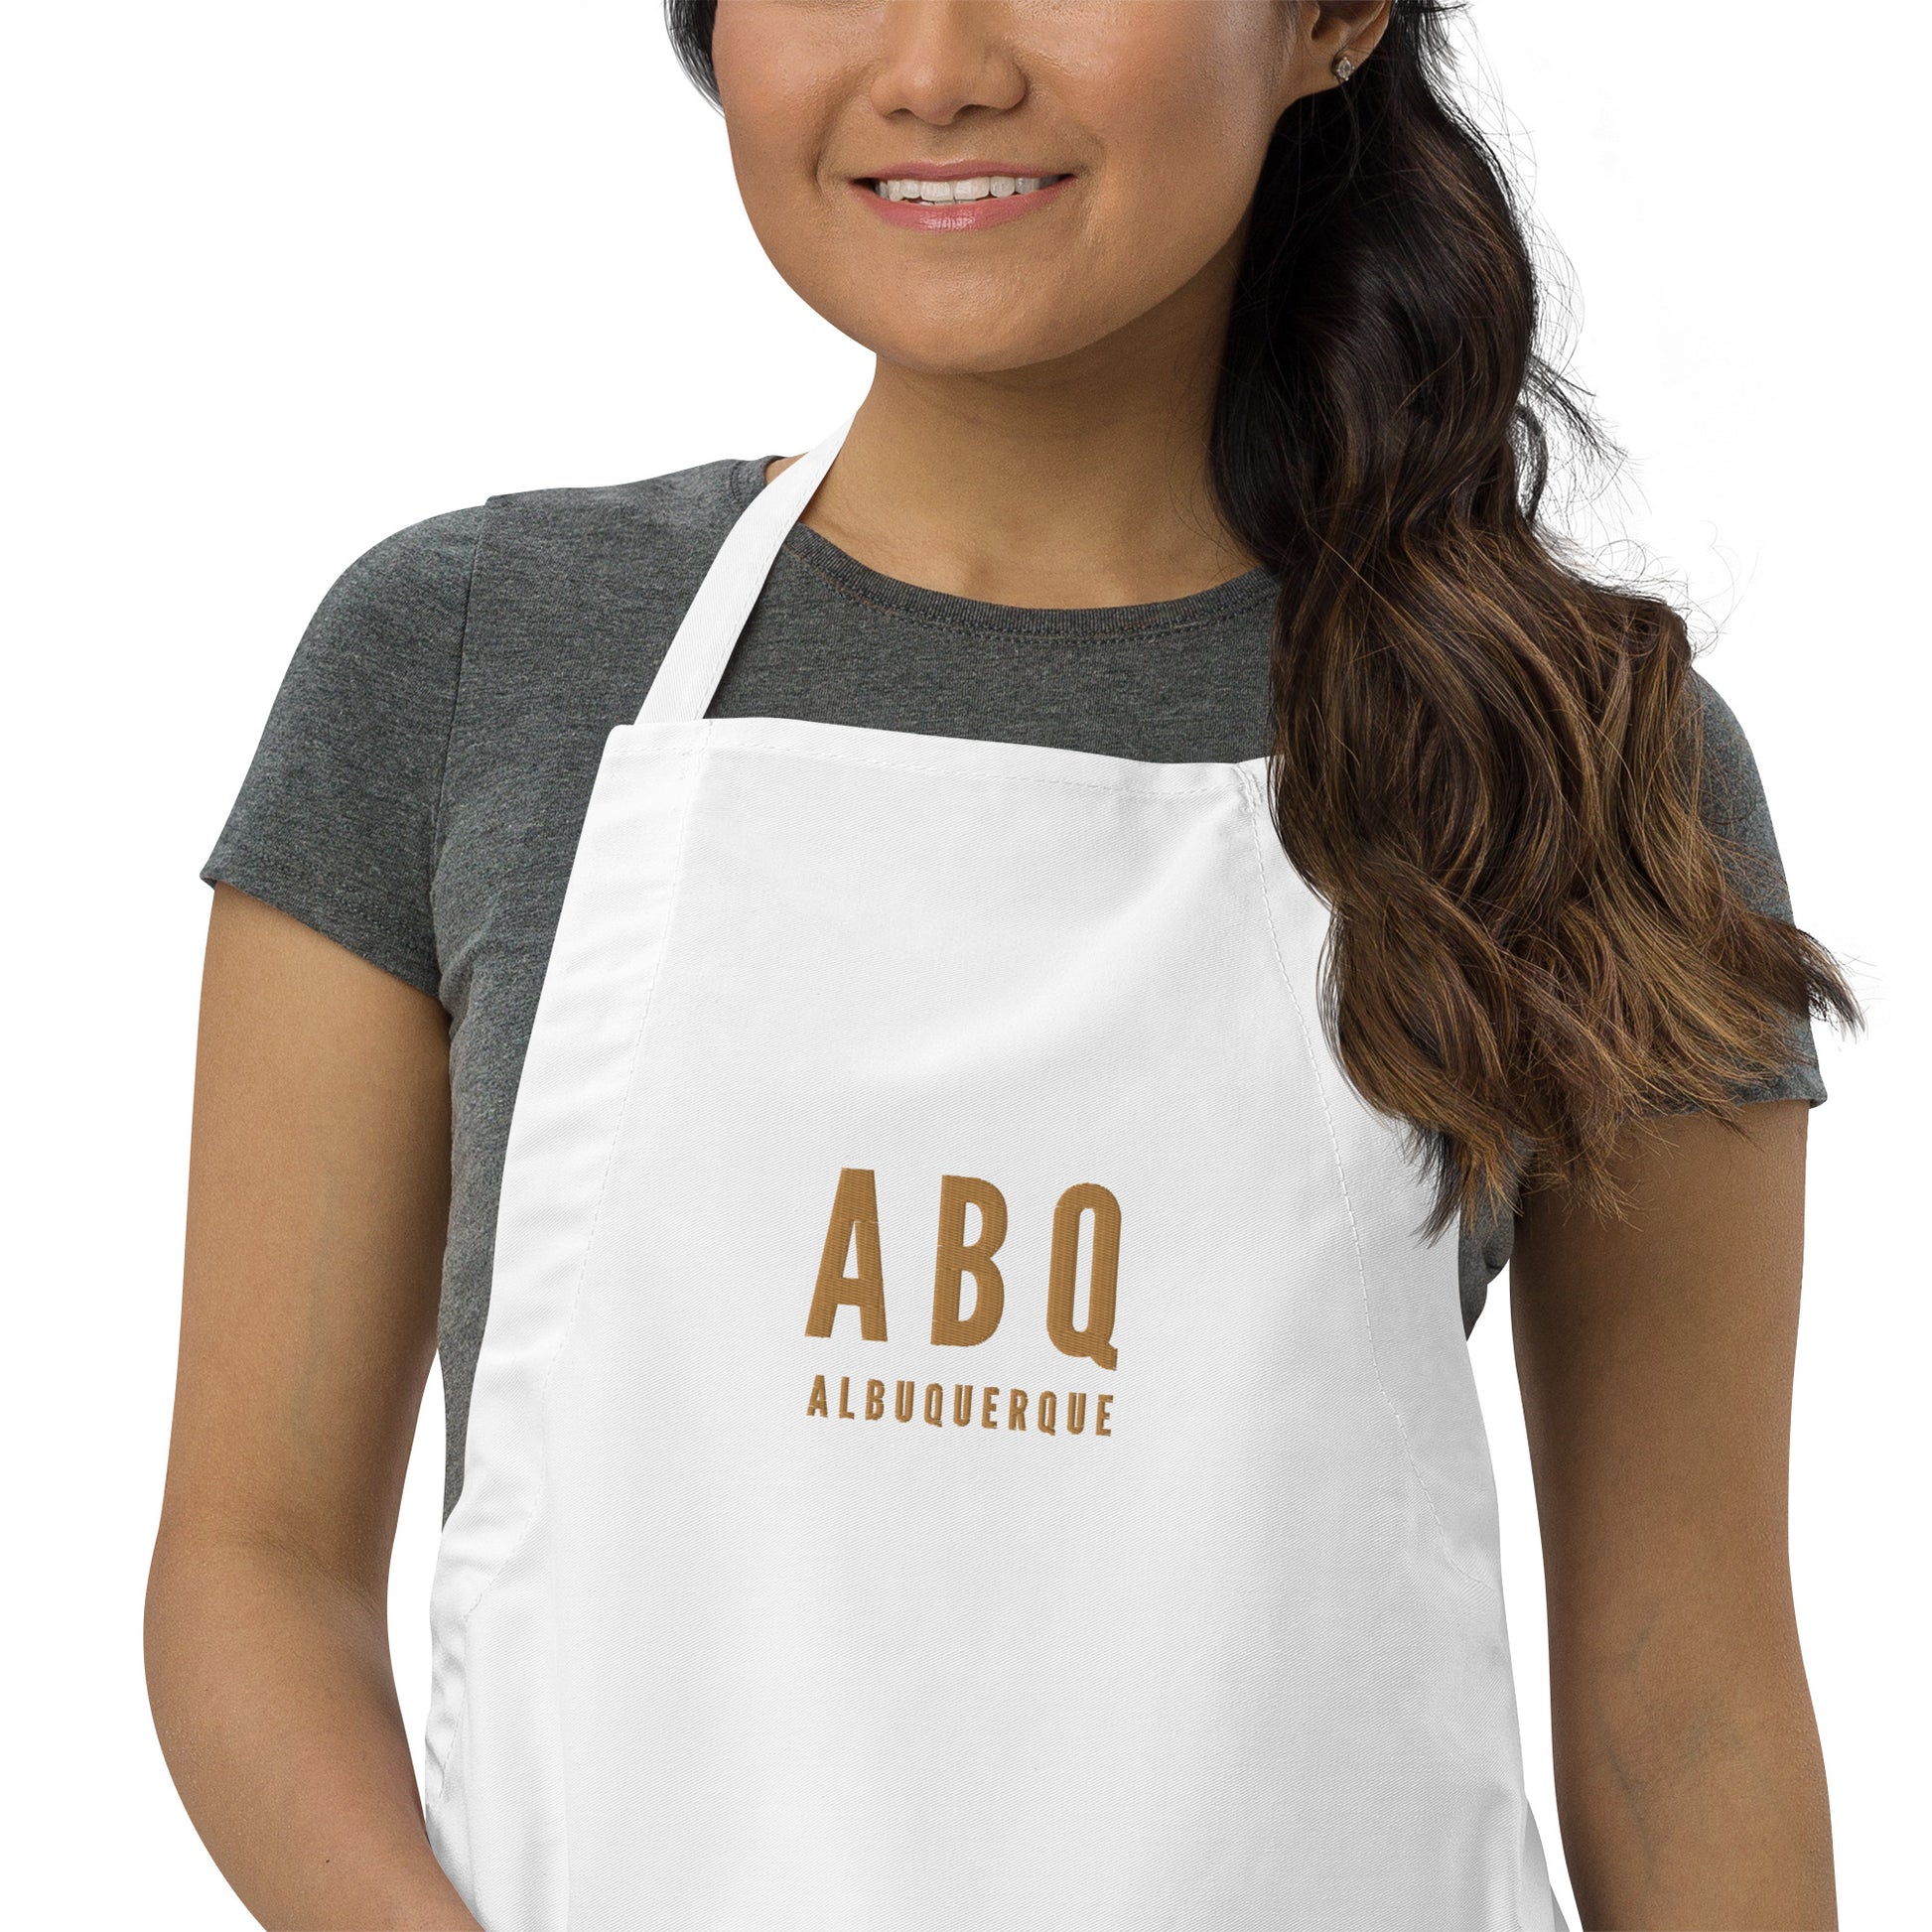 City Embroidered Apron - Old Gold • ABQ Albuquerque • YHM Designs - Image 08